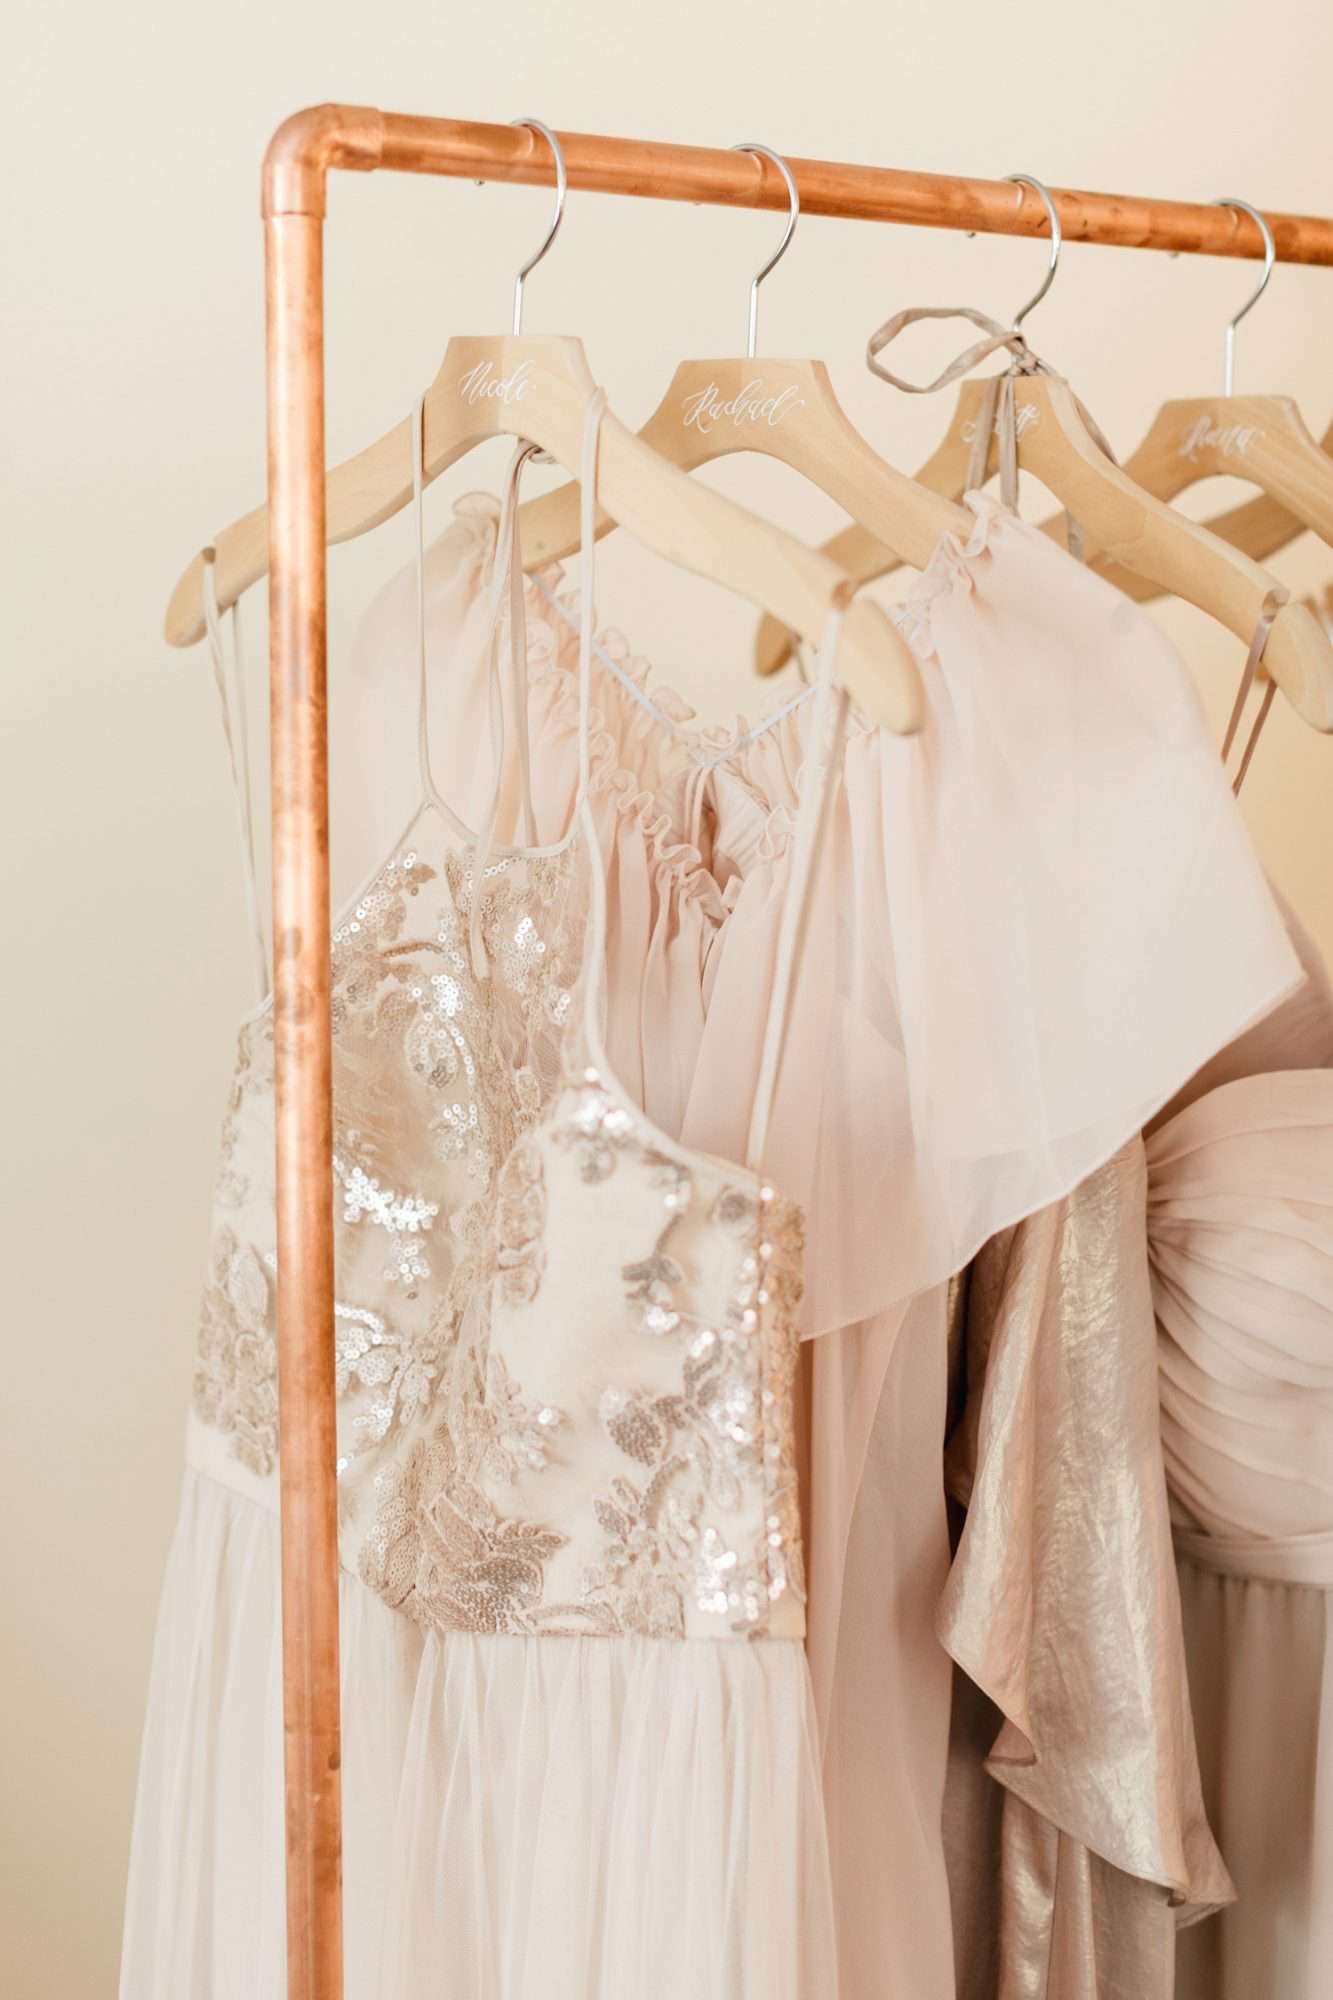 pale blush bridesmaids dresses hanging from copper clothing rack